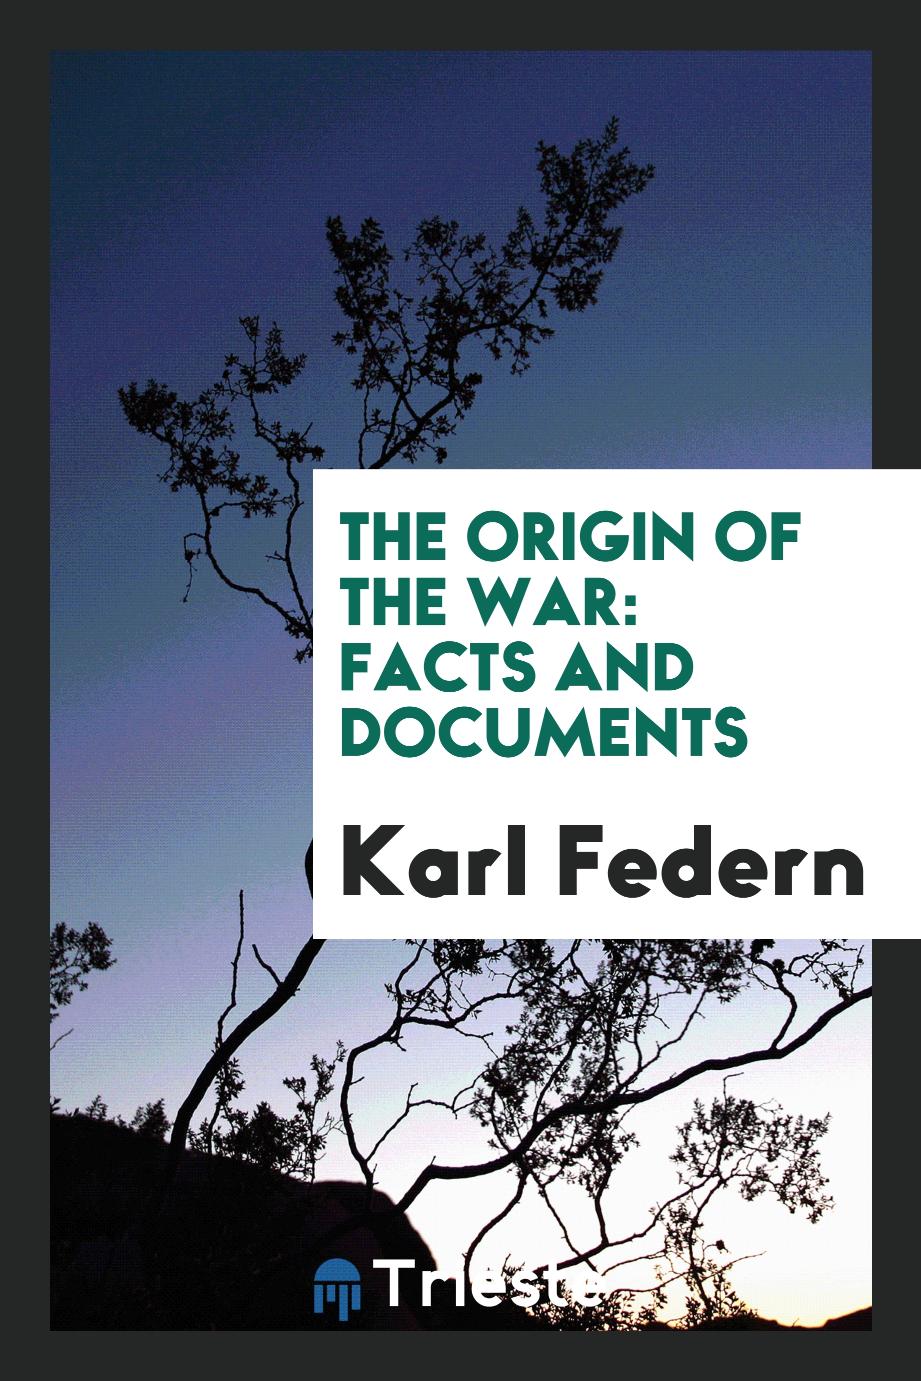 Karl Federn - The origin of the war: facts and documents